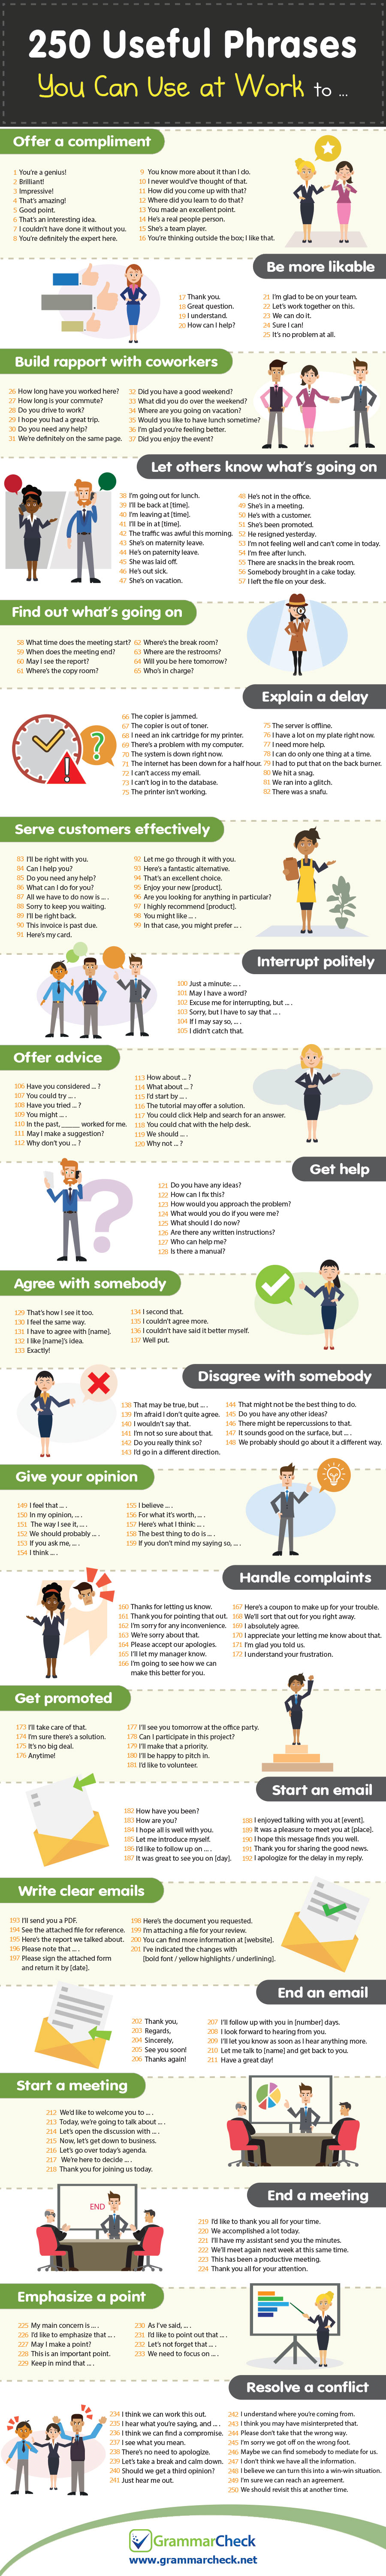 250 Useful Phrases You Can Use at Work (Infographic)